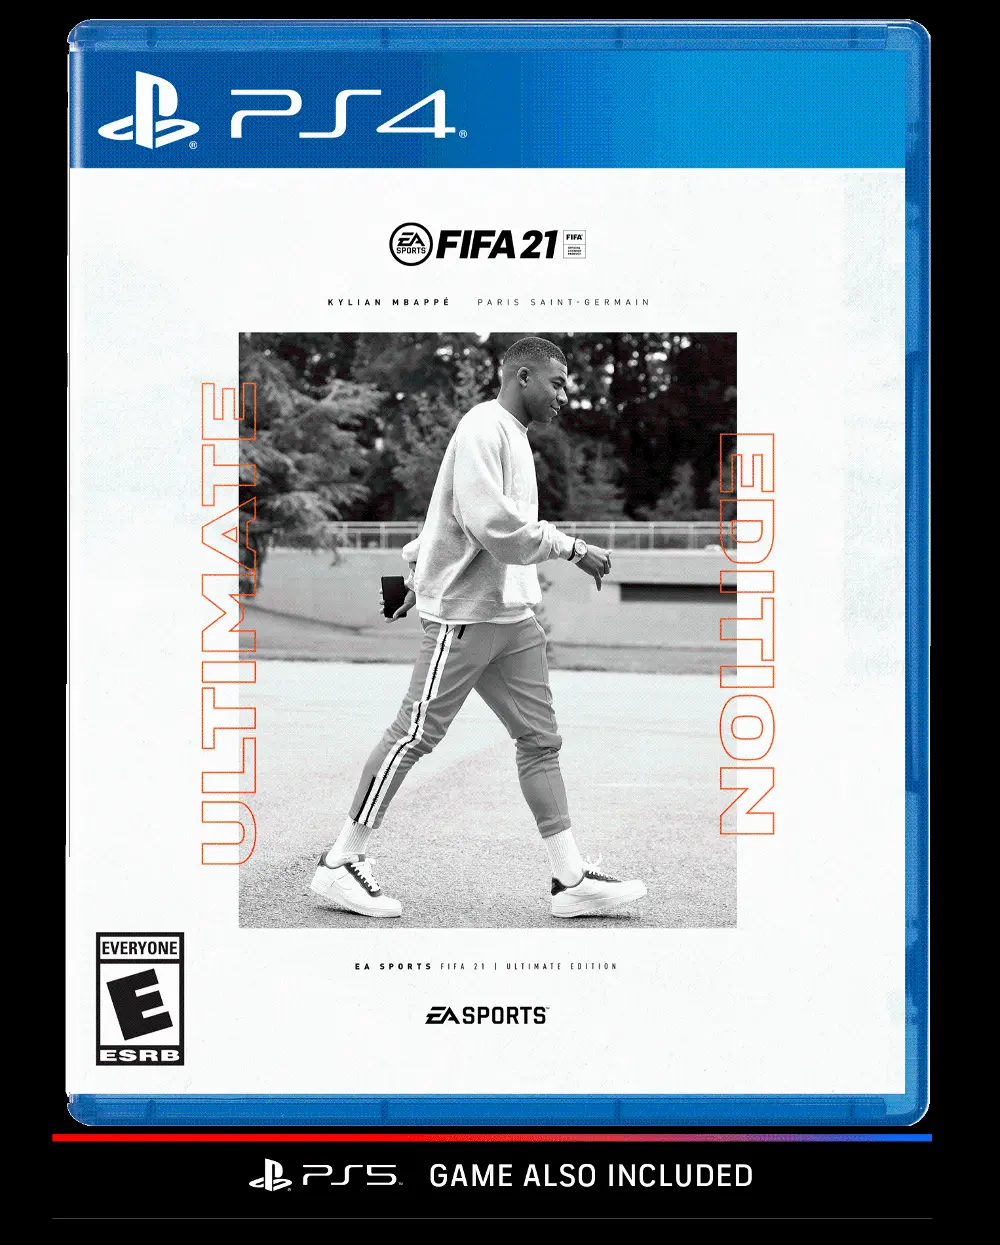 PS4/FIFA_21,ULTIMATE FIFA 21 Ultimate Edition - PS4, PS5-1